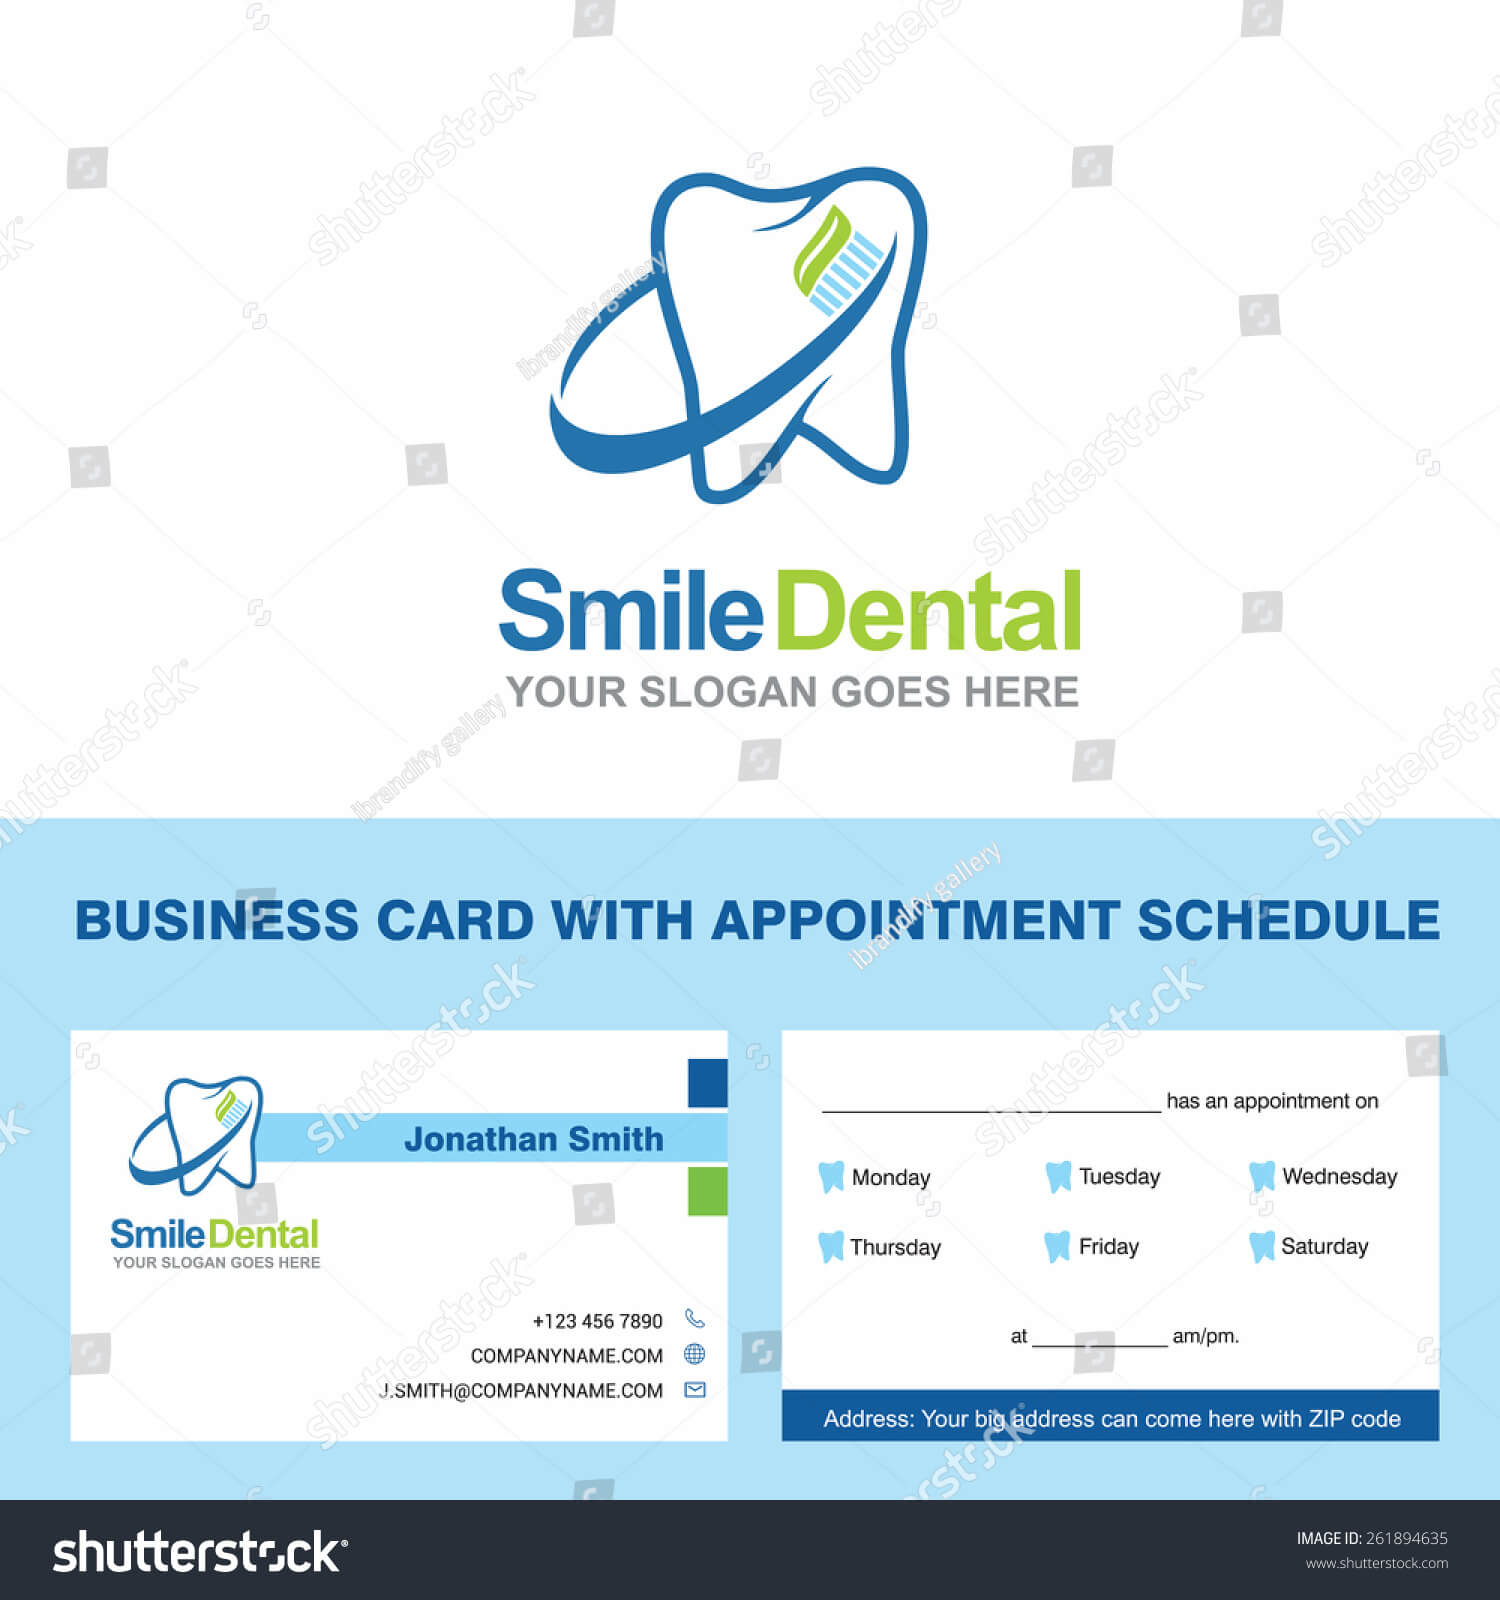 Abstract Vector Smile Dental Identity Concept Stock Vector Pertaining To Dentist Appointment Card Template